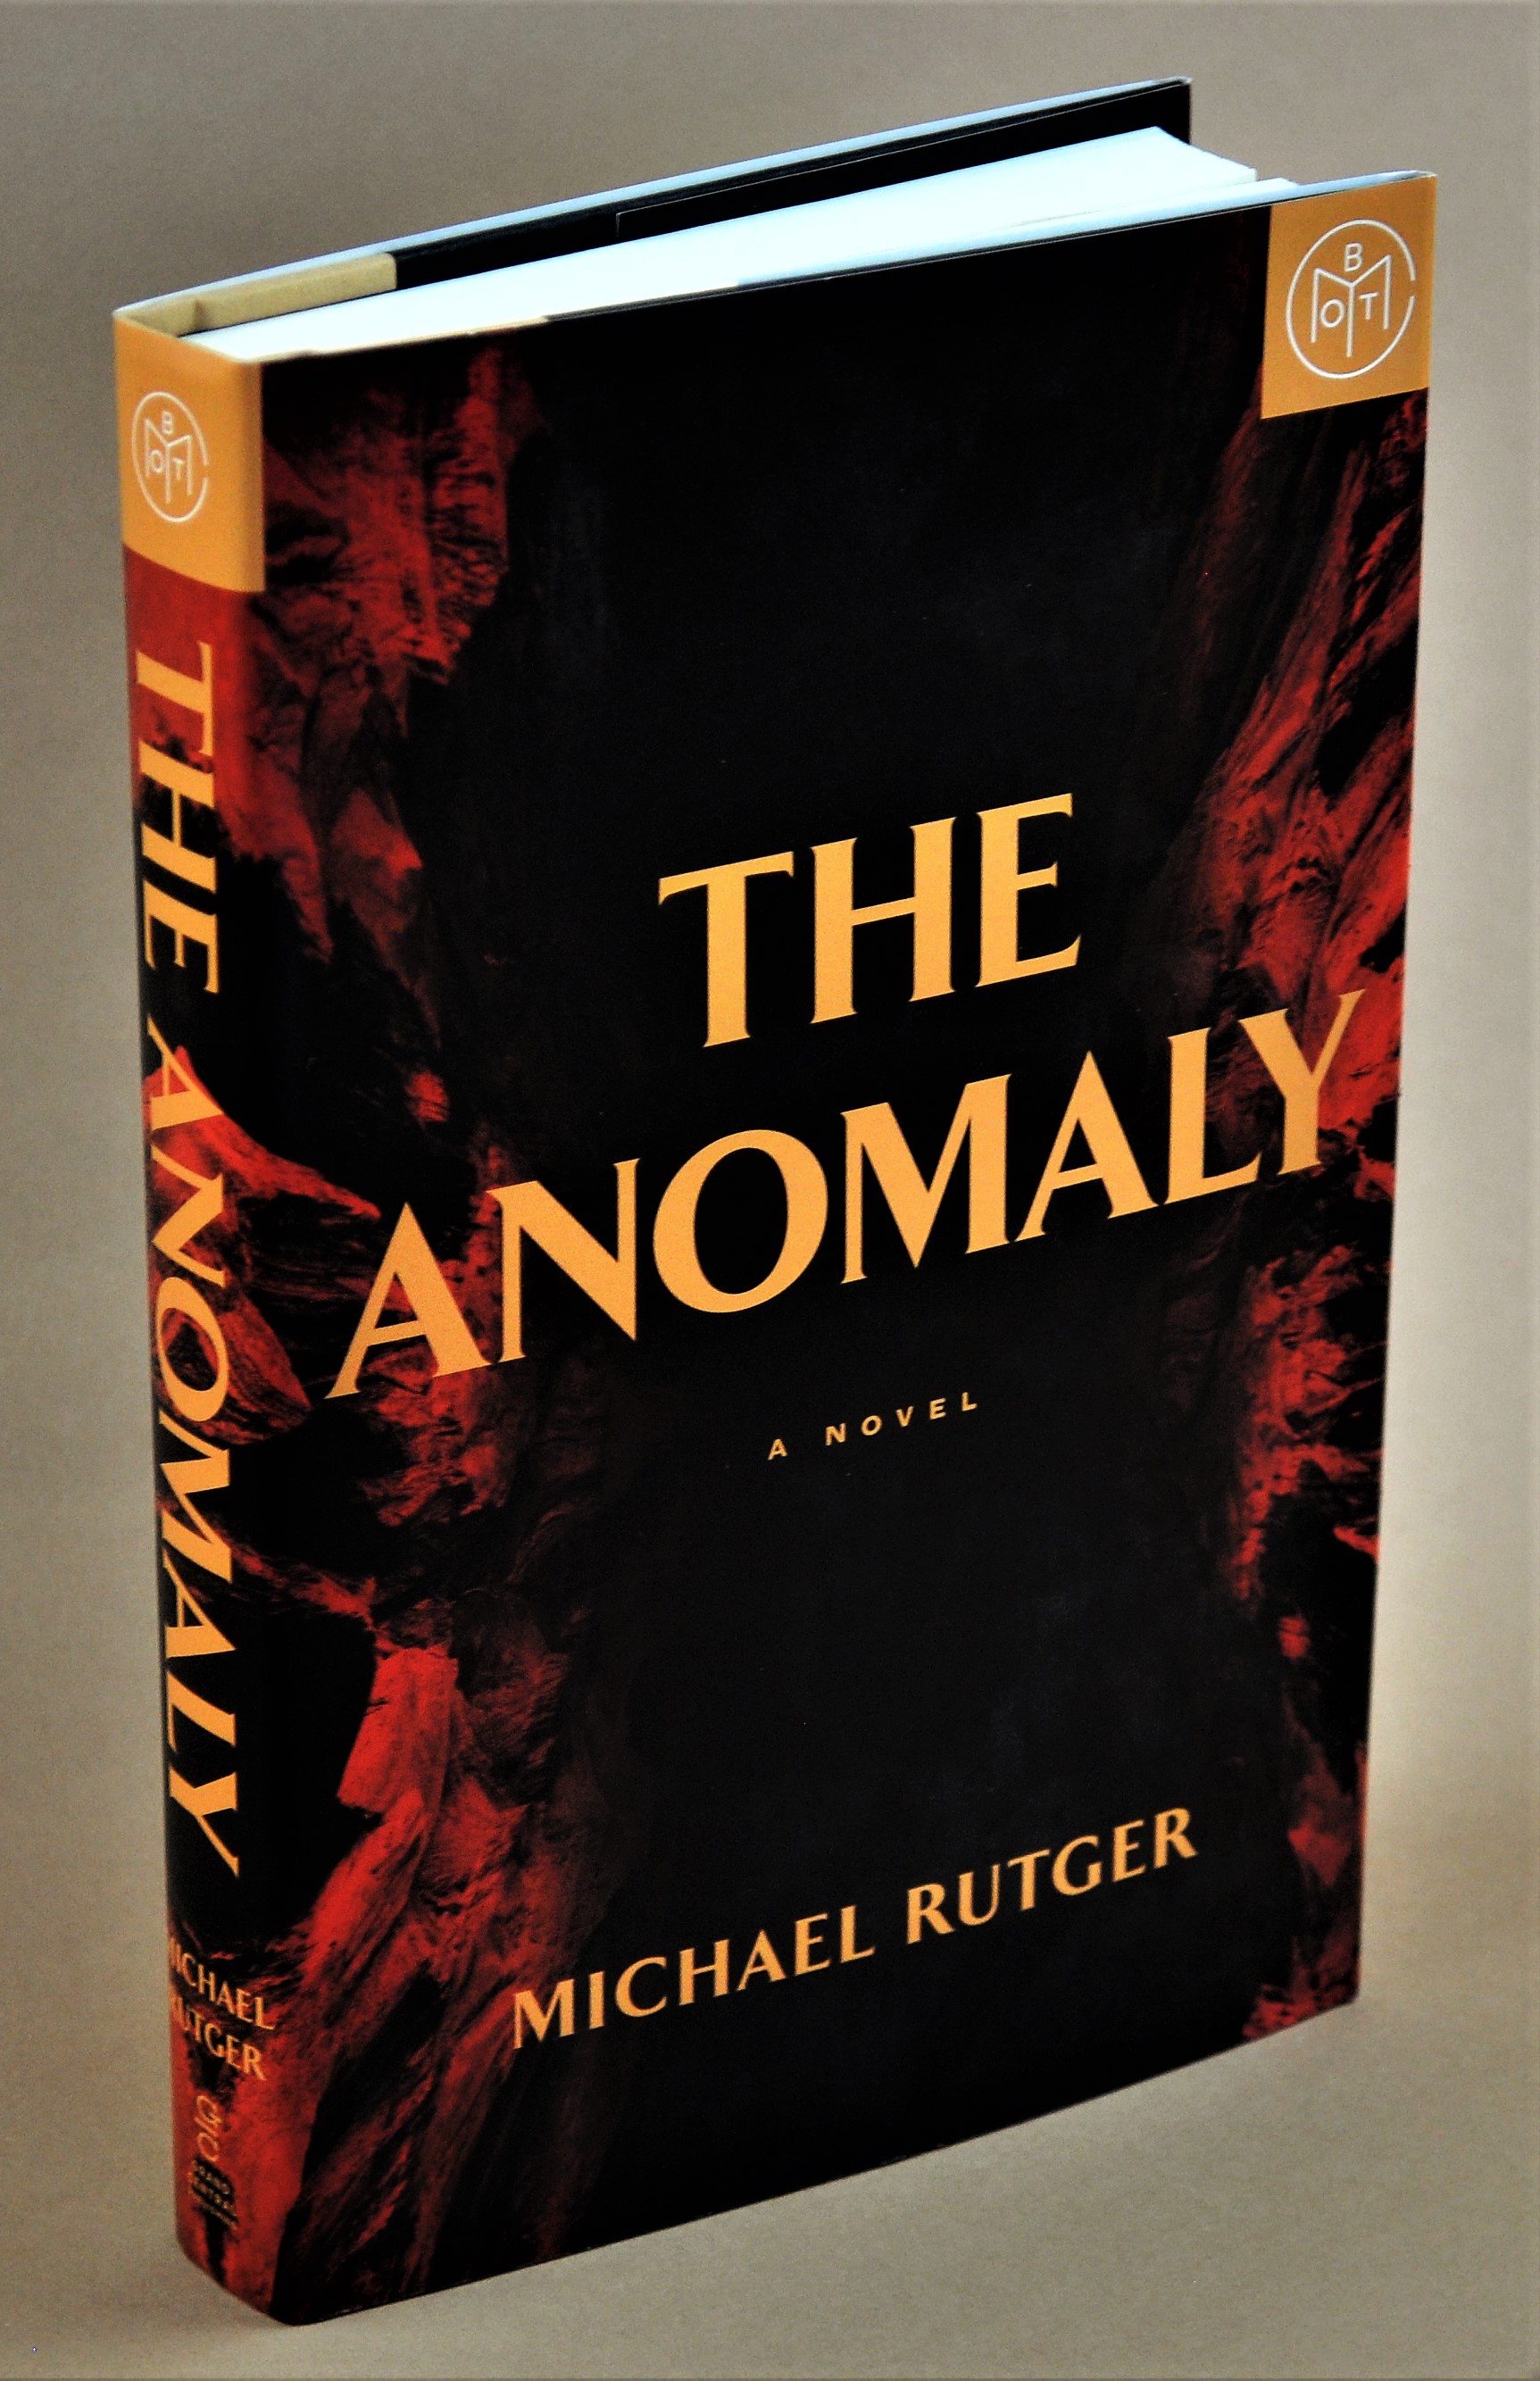 The Anomaly; Michael Rutger; Book Review